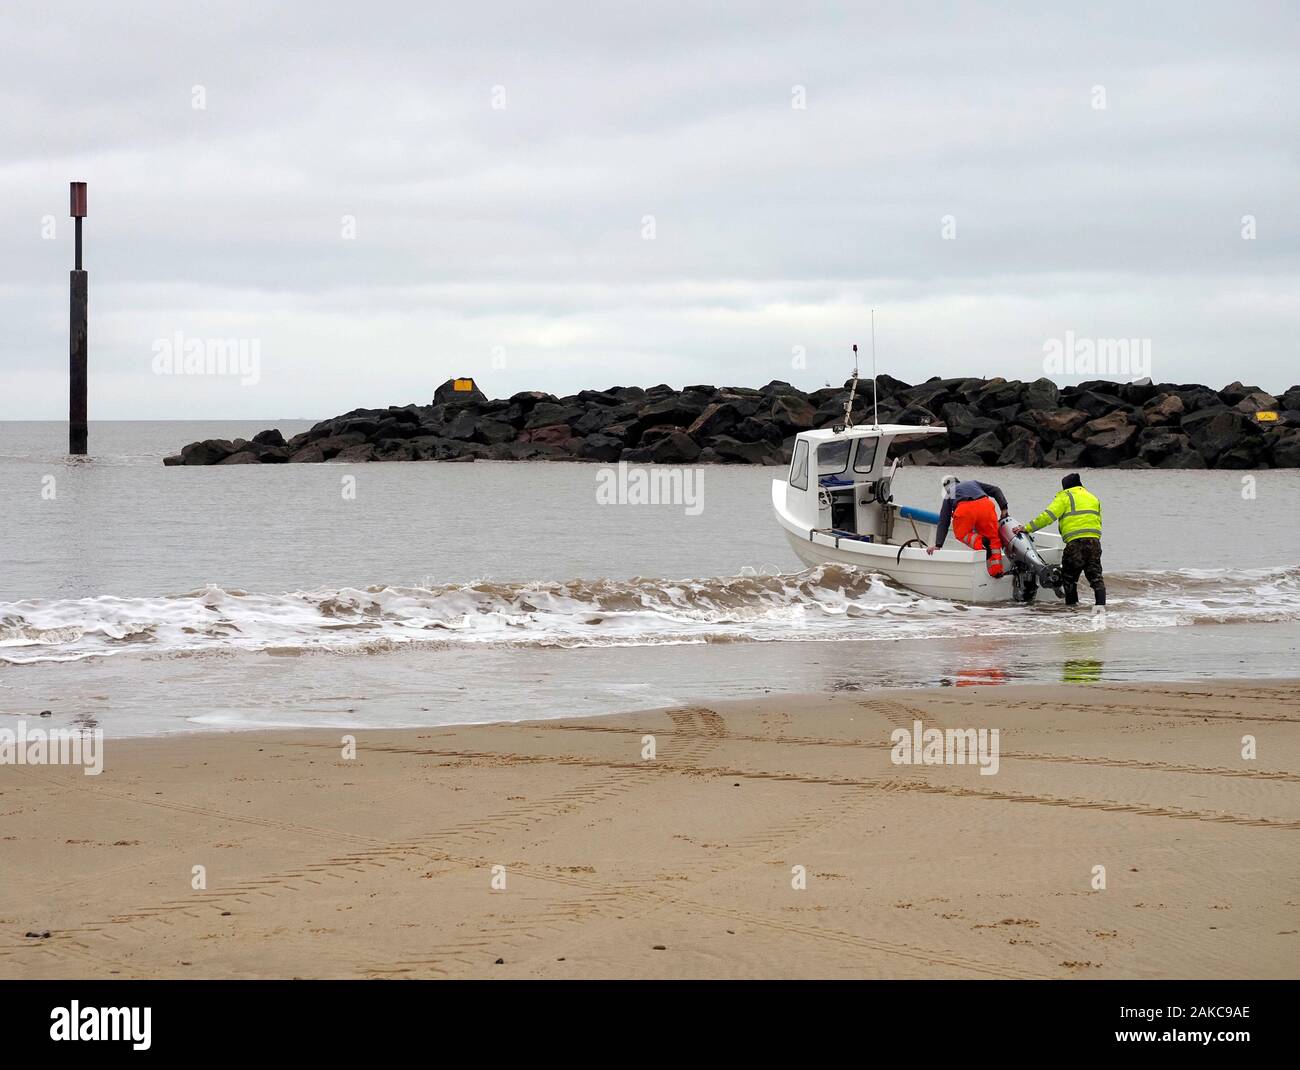 Longshore fishermen launch a small fibreglass boat from the beach at Sea Palling, Norfolk in the shelter of a rock island sea defence structure. Stock Photo